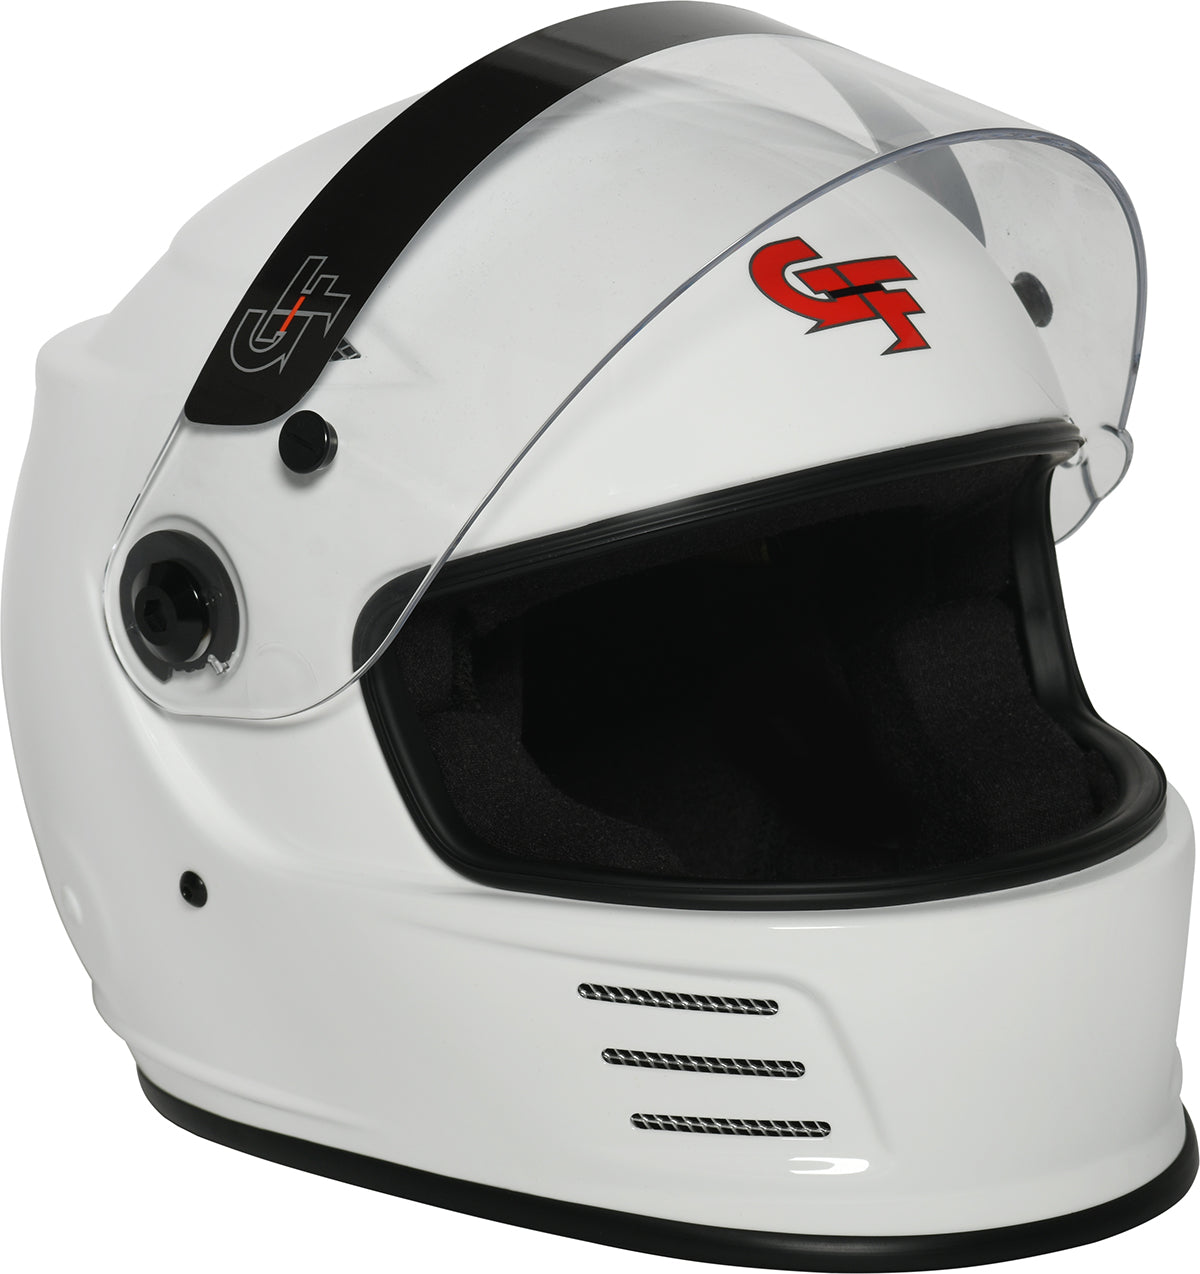 G-FORCE Racing Gear REVO FULL FACE HELMET SML WH SA15 3410SMLWH